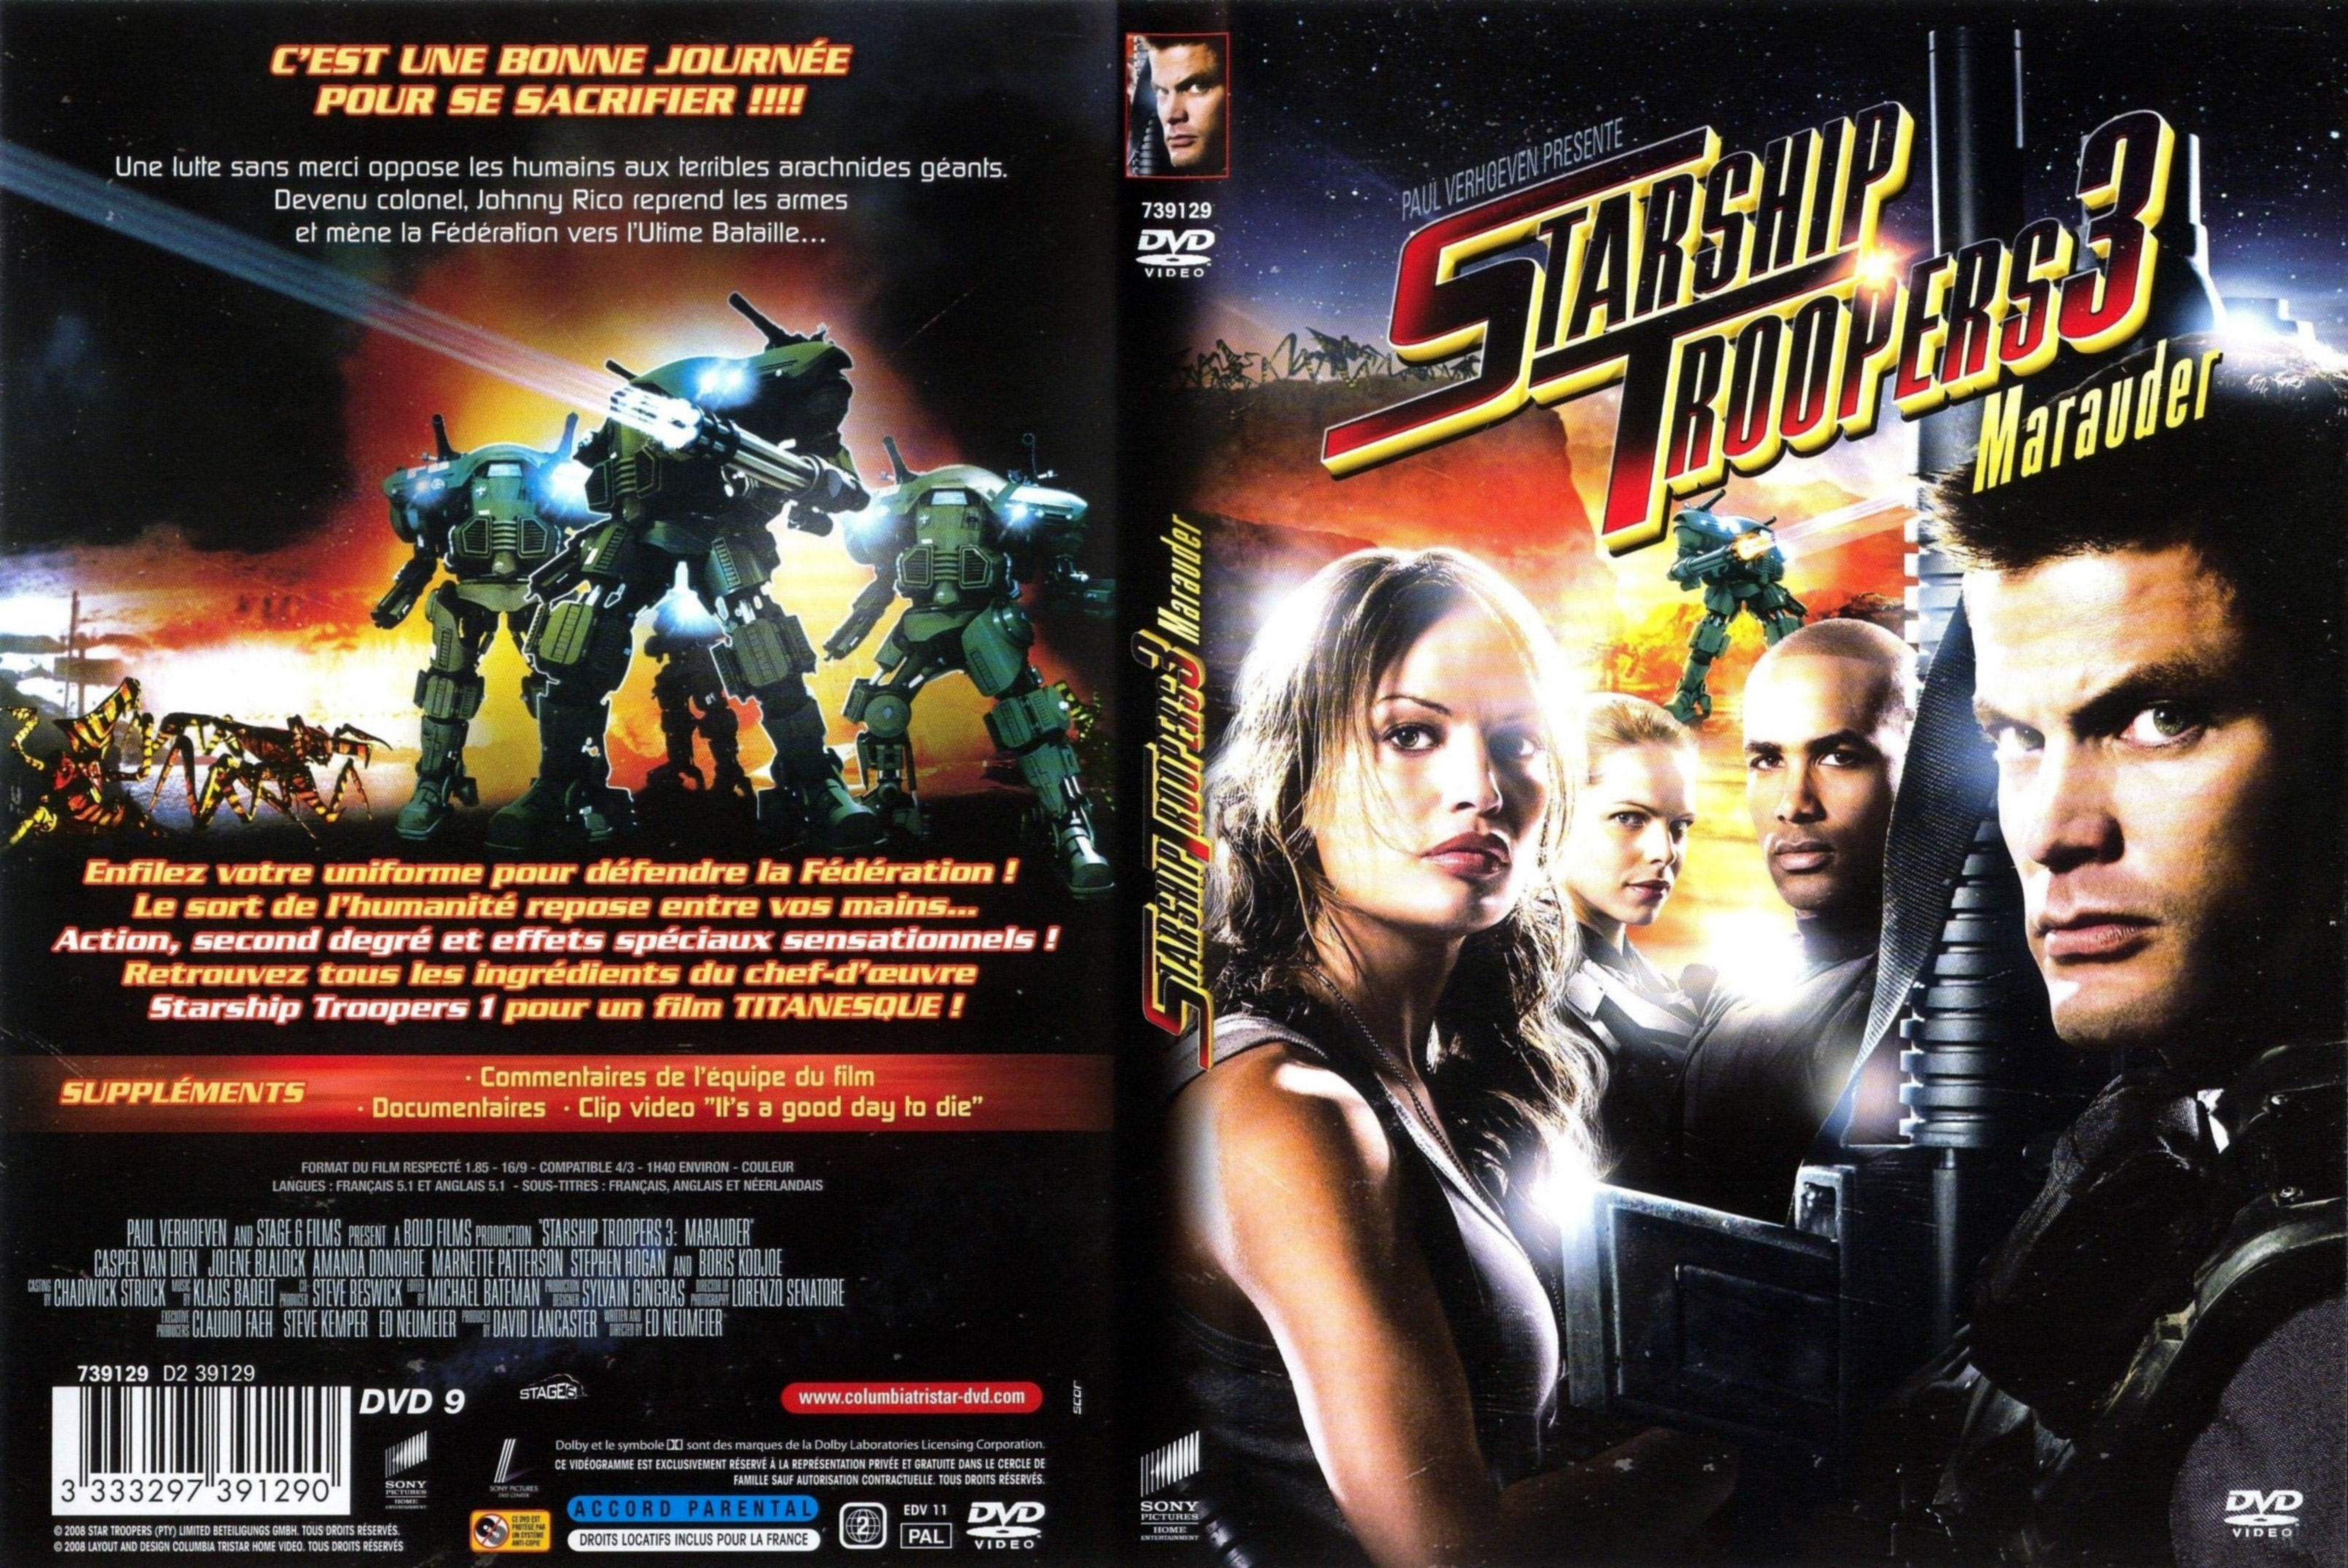 Jaquette DVD Starship troopers 3